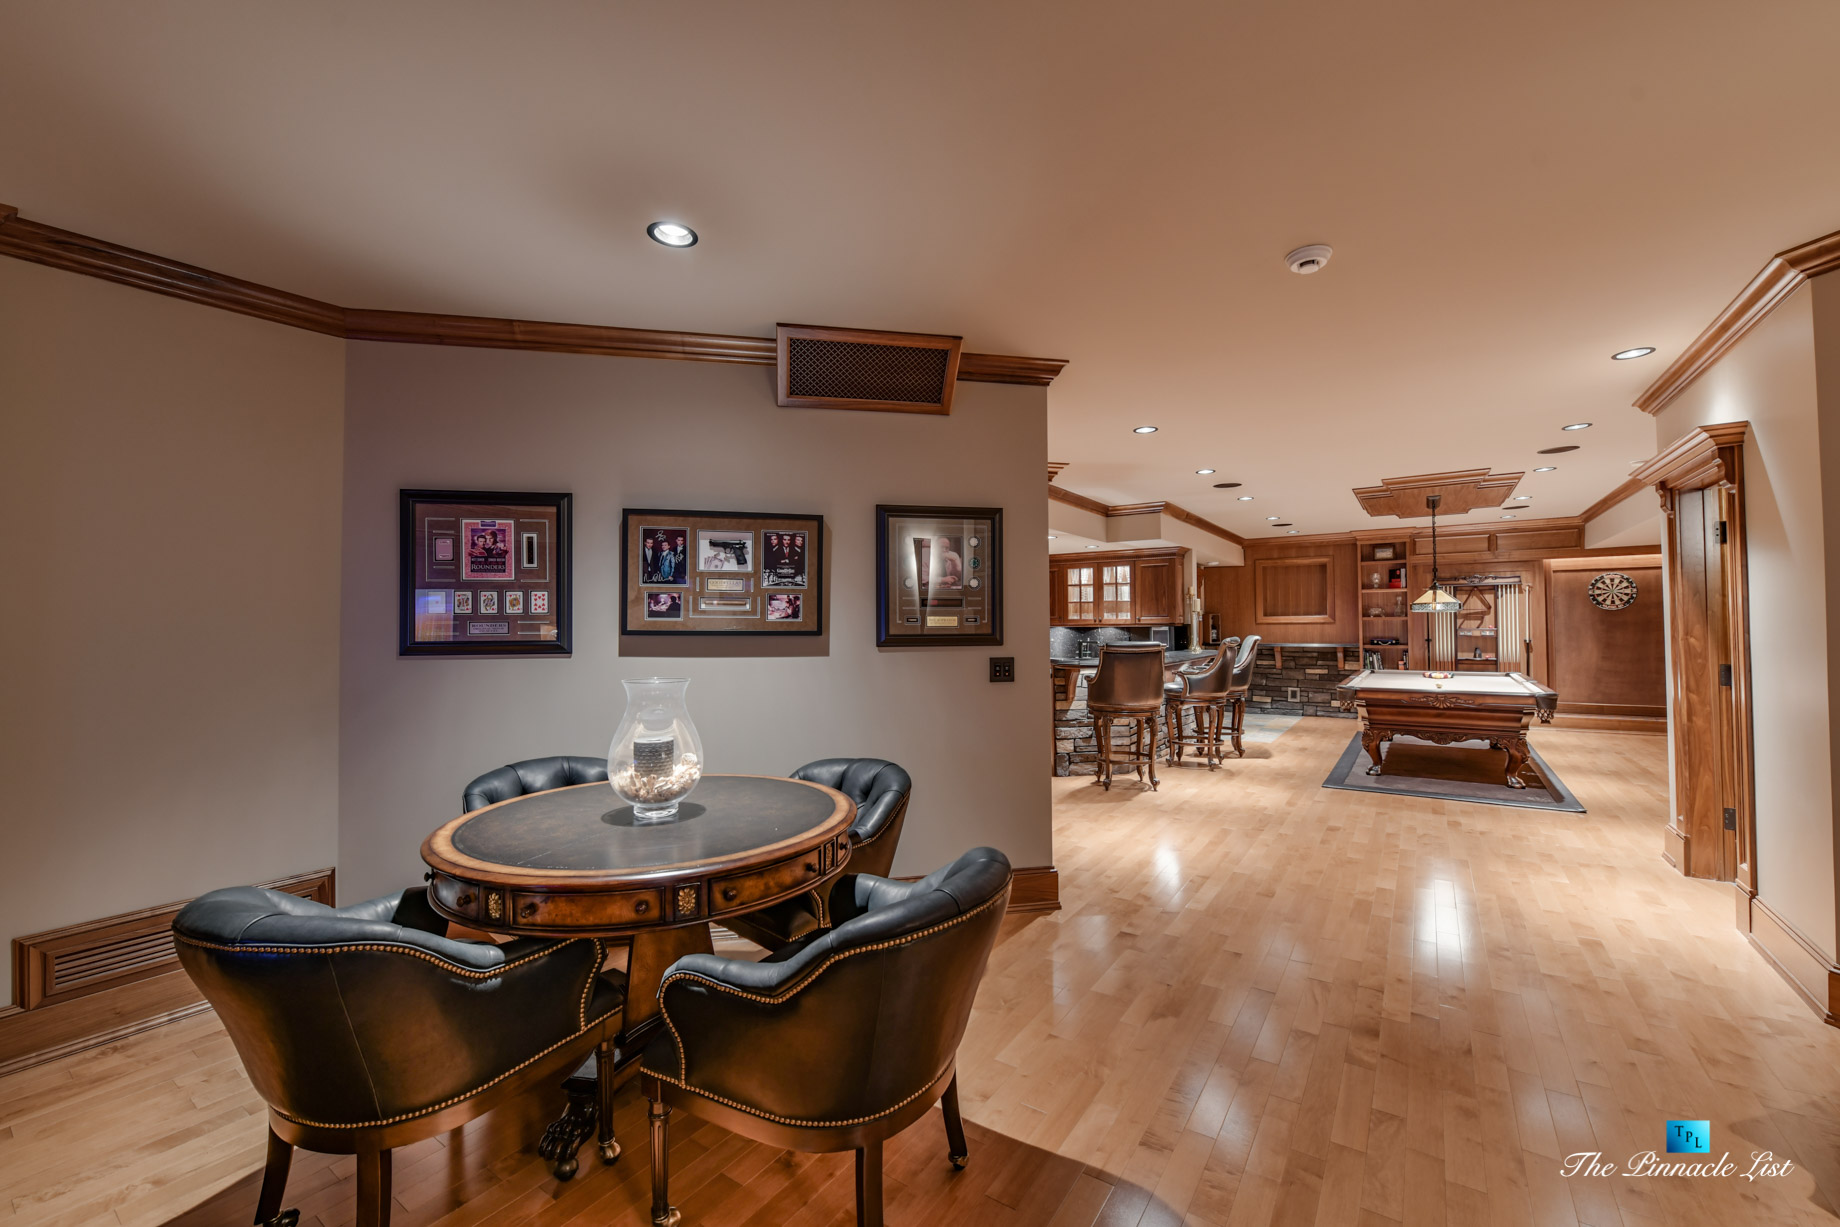 3053 Anmore Creek Way, Anmore, BC, Canada – Basement Man Cave Poker Table – Luxury Real Estate – Greater Vancouver Home